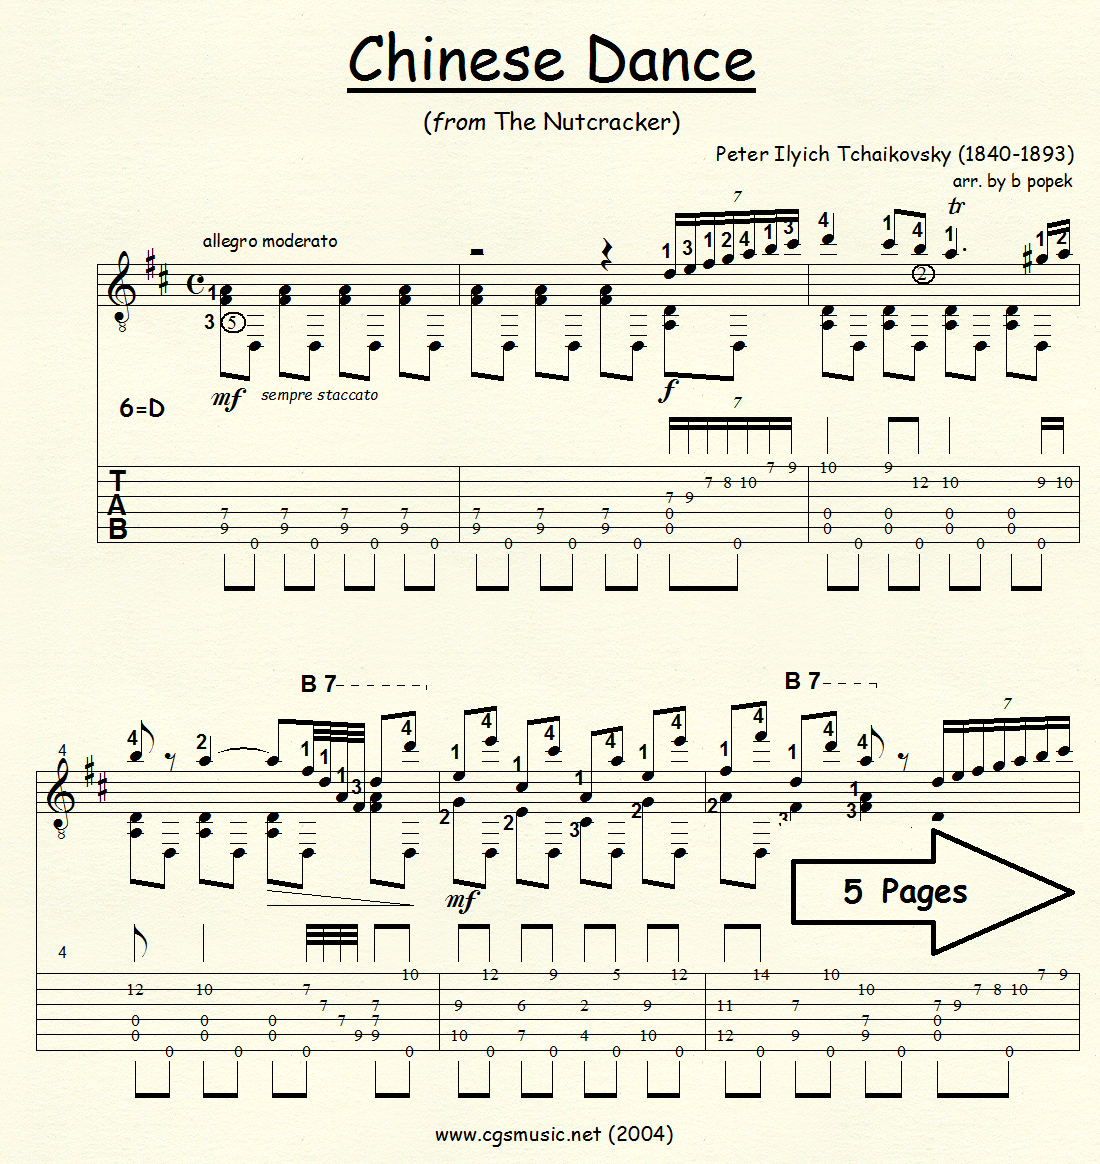 Chinese Dance (Tchaikovsky) from The Nutcracker Suite for Classical Guitar in Tablature